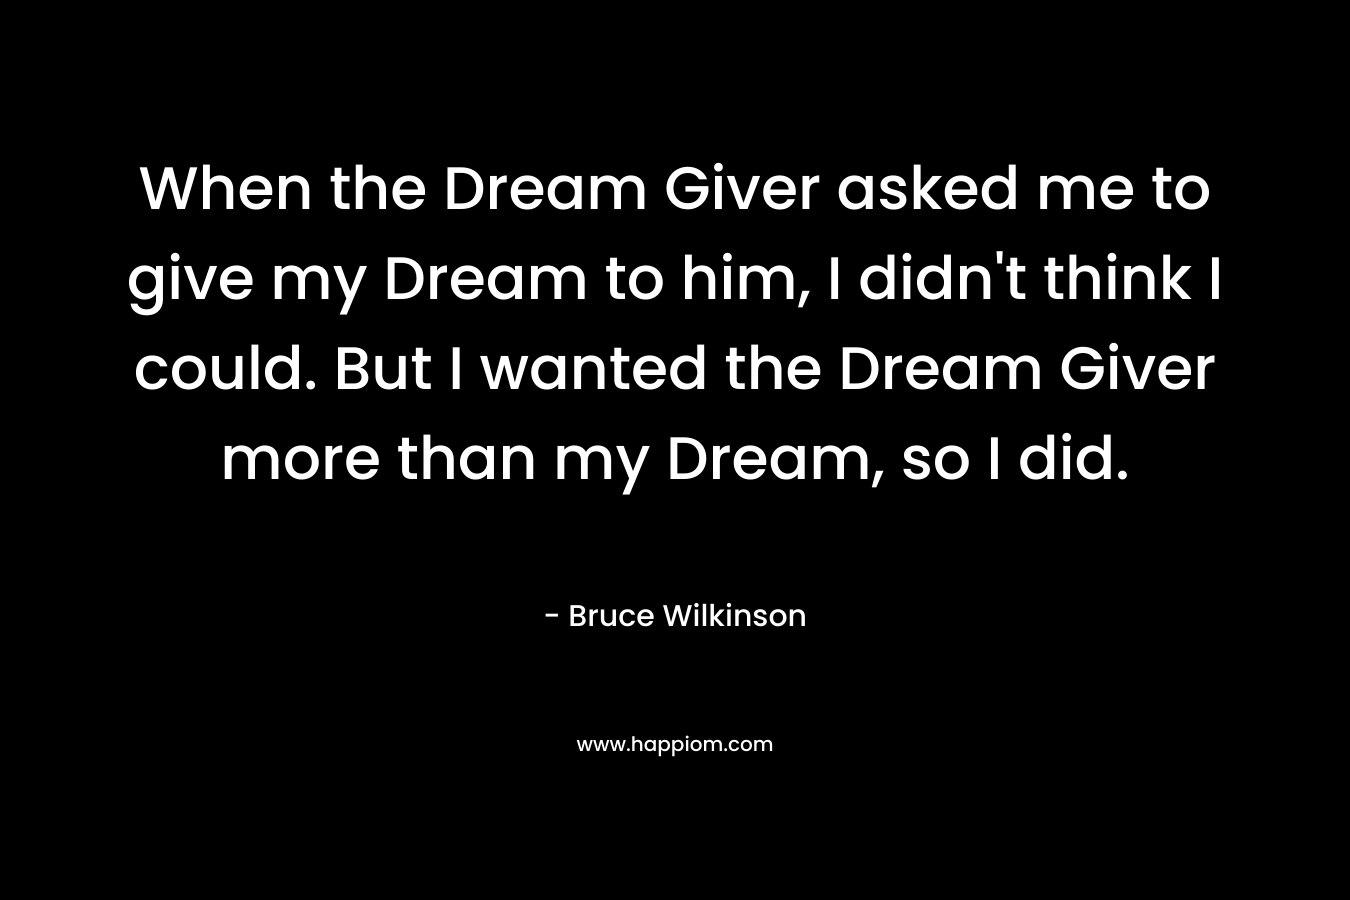 When the Dream Giver asked me to give my Dream to him, I didn't think I could. But I wanted the Dream Giver more than my Dream, so I did.